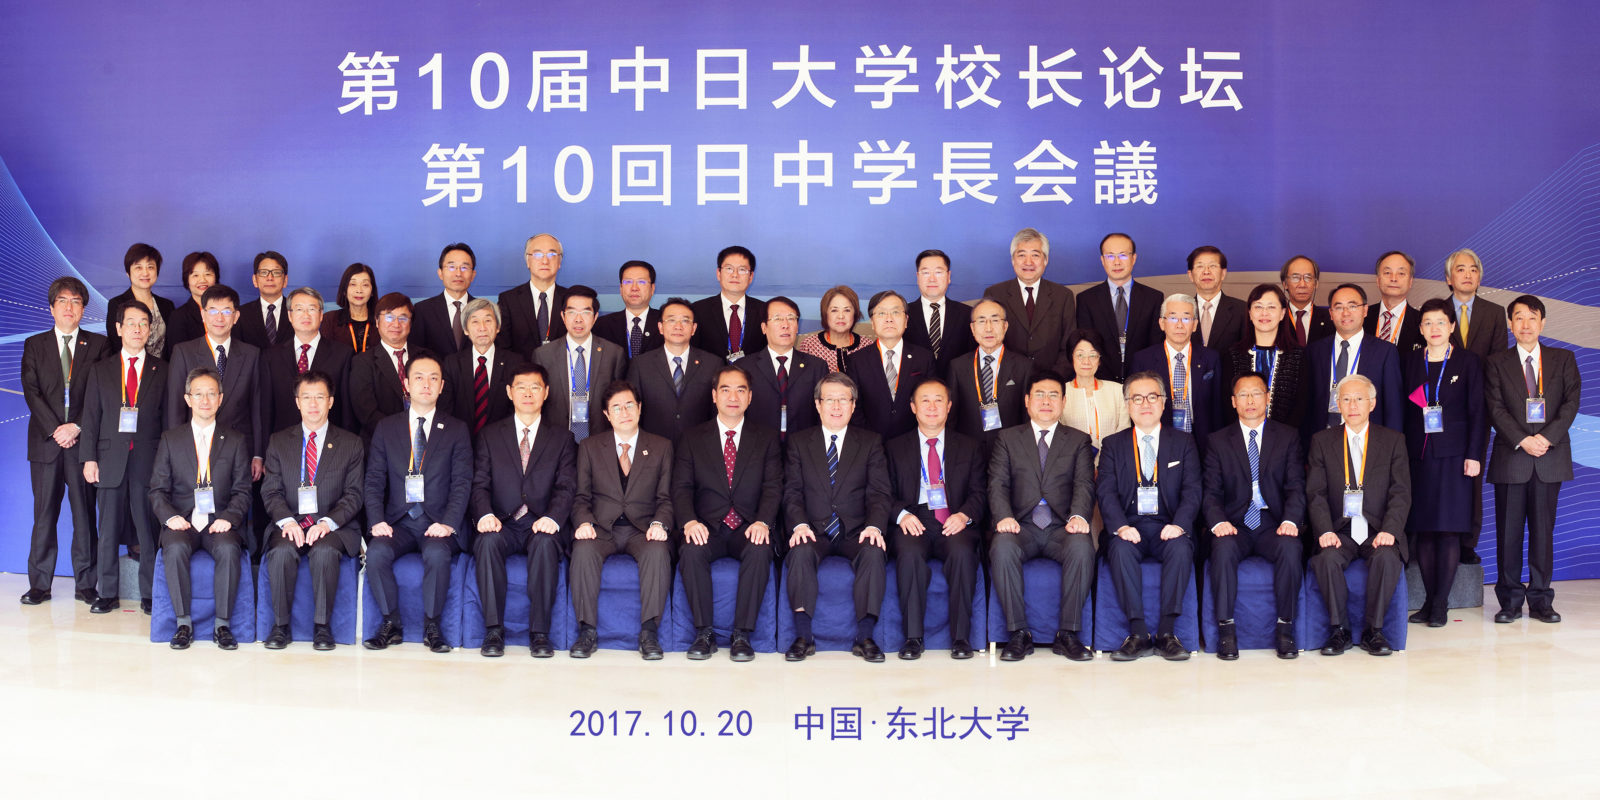 Photo of representatives from the universities in attendance. Vice President Kasahara is sitting in the front row on the far right.